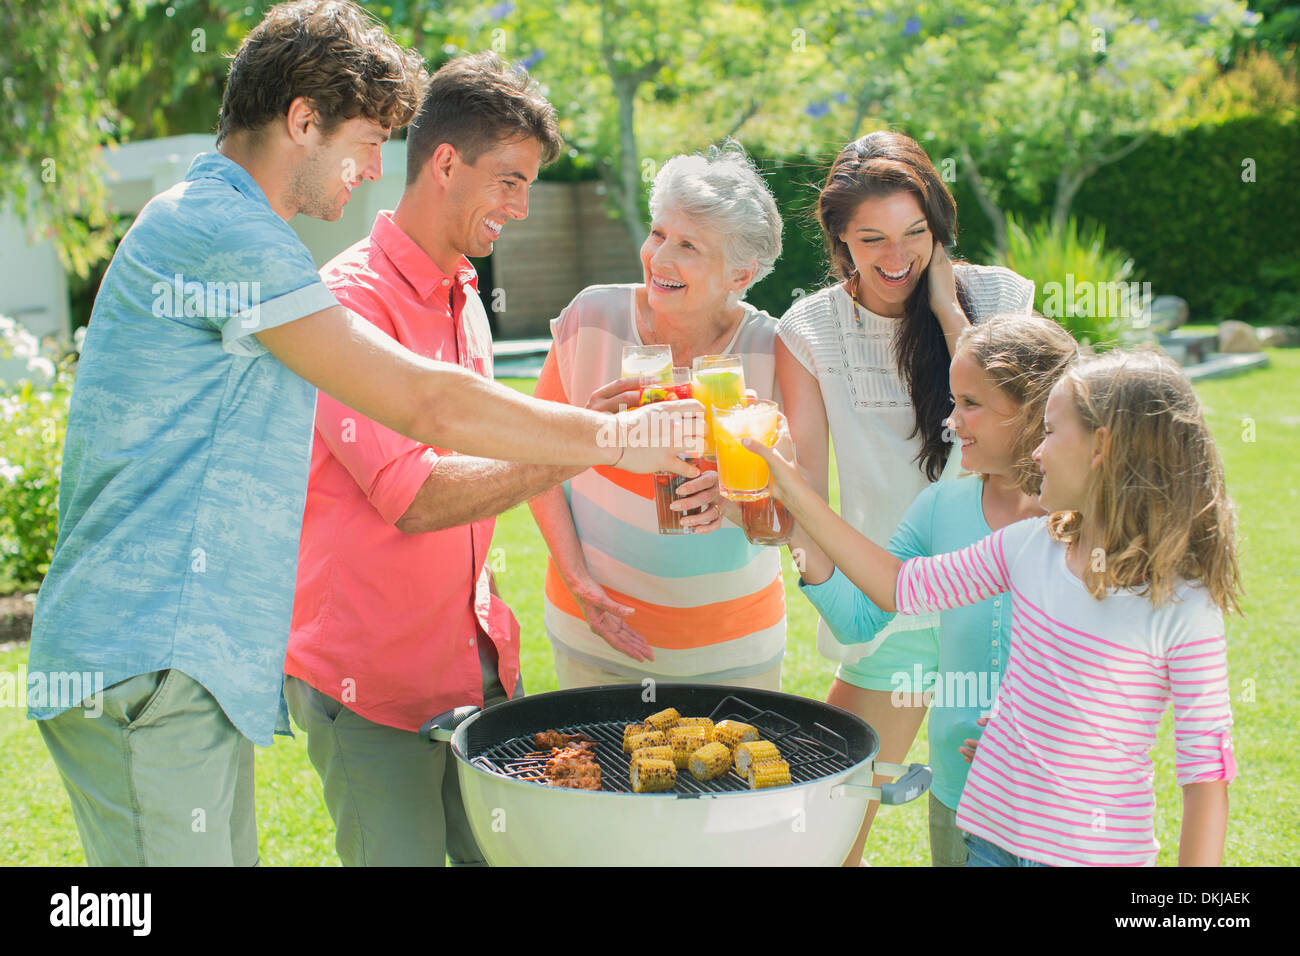 Family toasting each other at barbecue Stock Photo